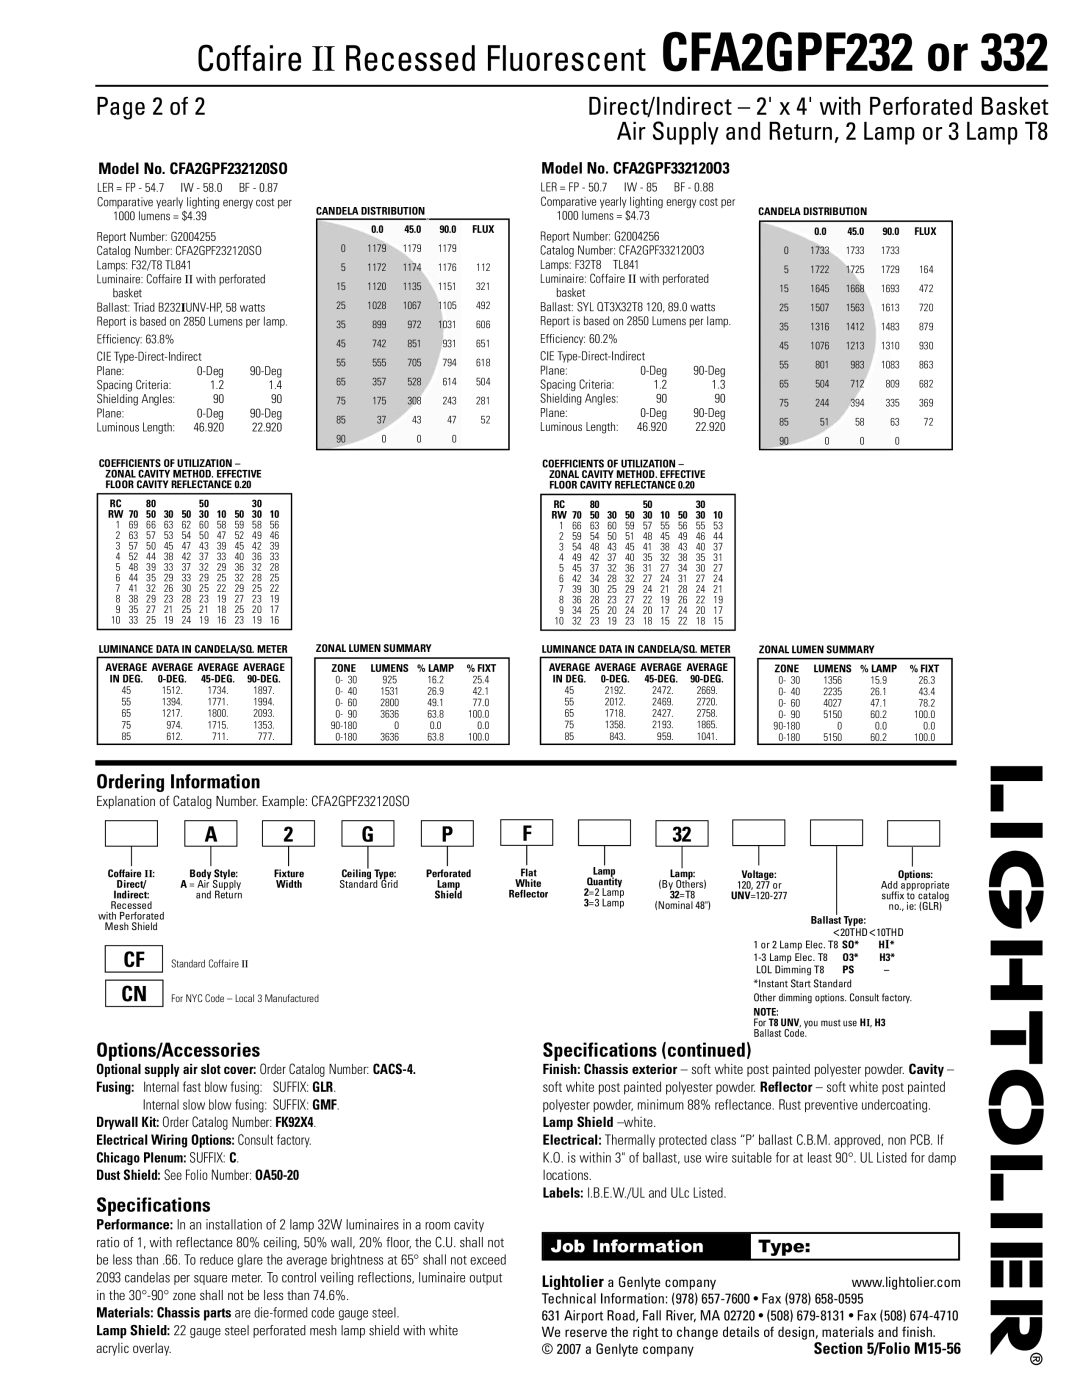 Lightolier CFA2GPF232 Page 2 of, Ordering Information, Options/Accessories, Specifications continued, Job Information 